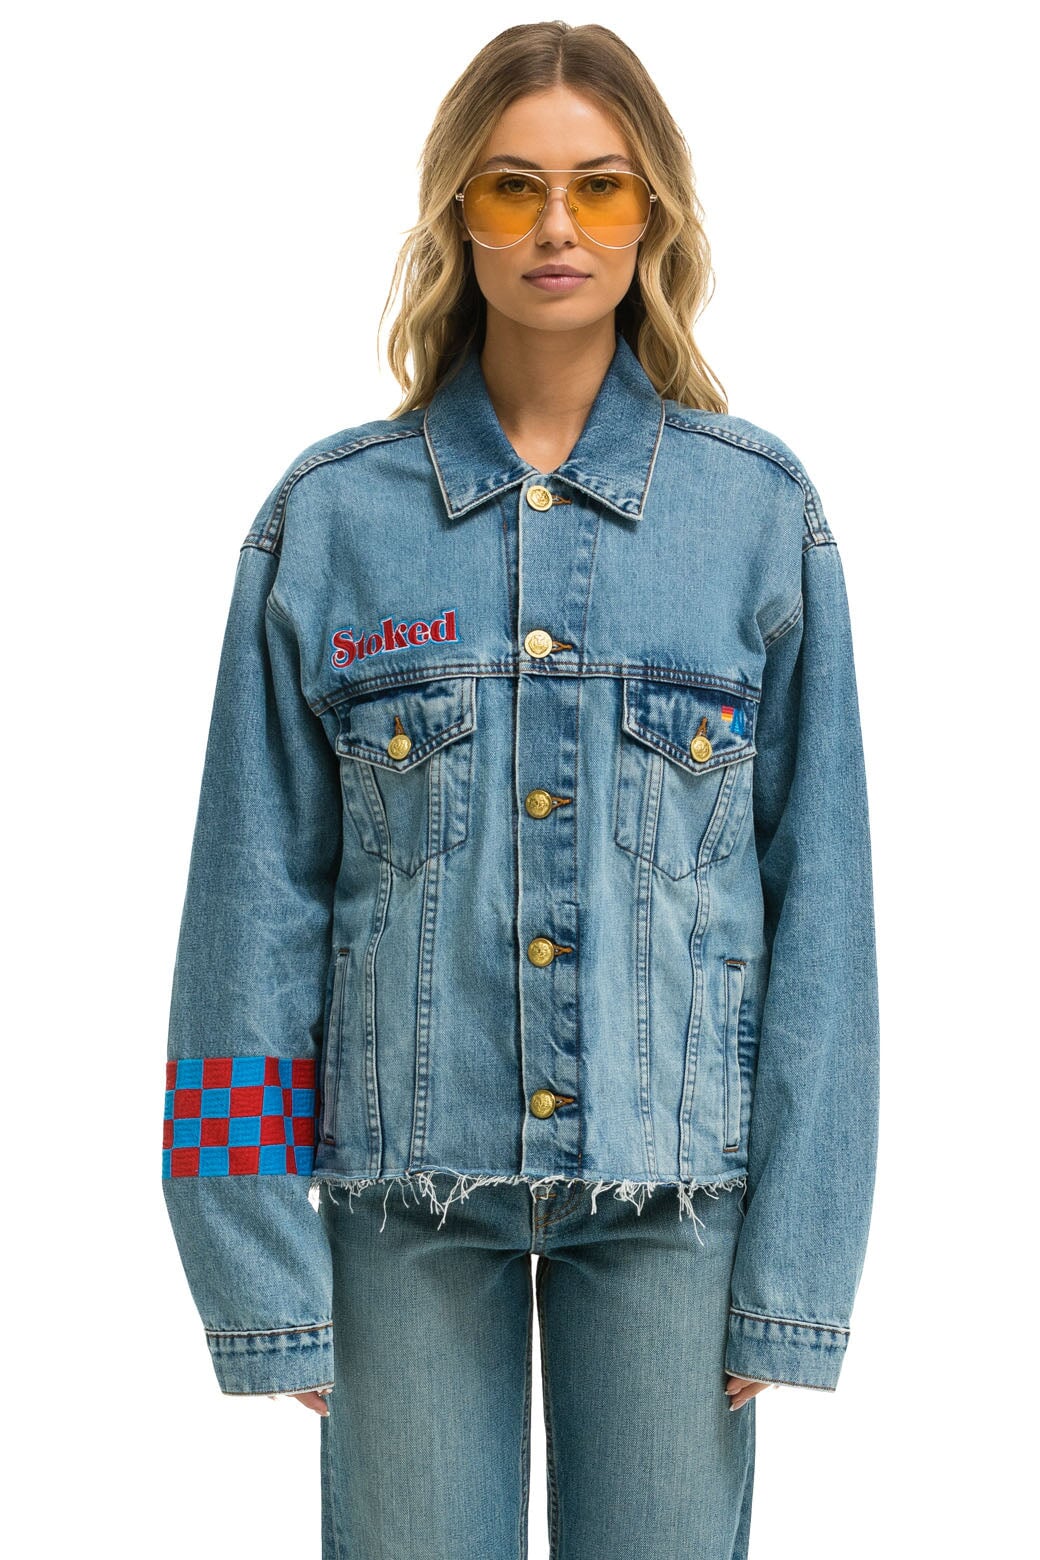 Denim Jacket Hand: Over 926 Royalty-Free Licensable Stock Illustrations &  Drawings | Shutterstock